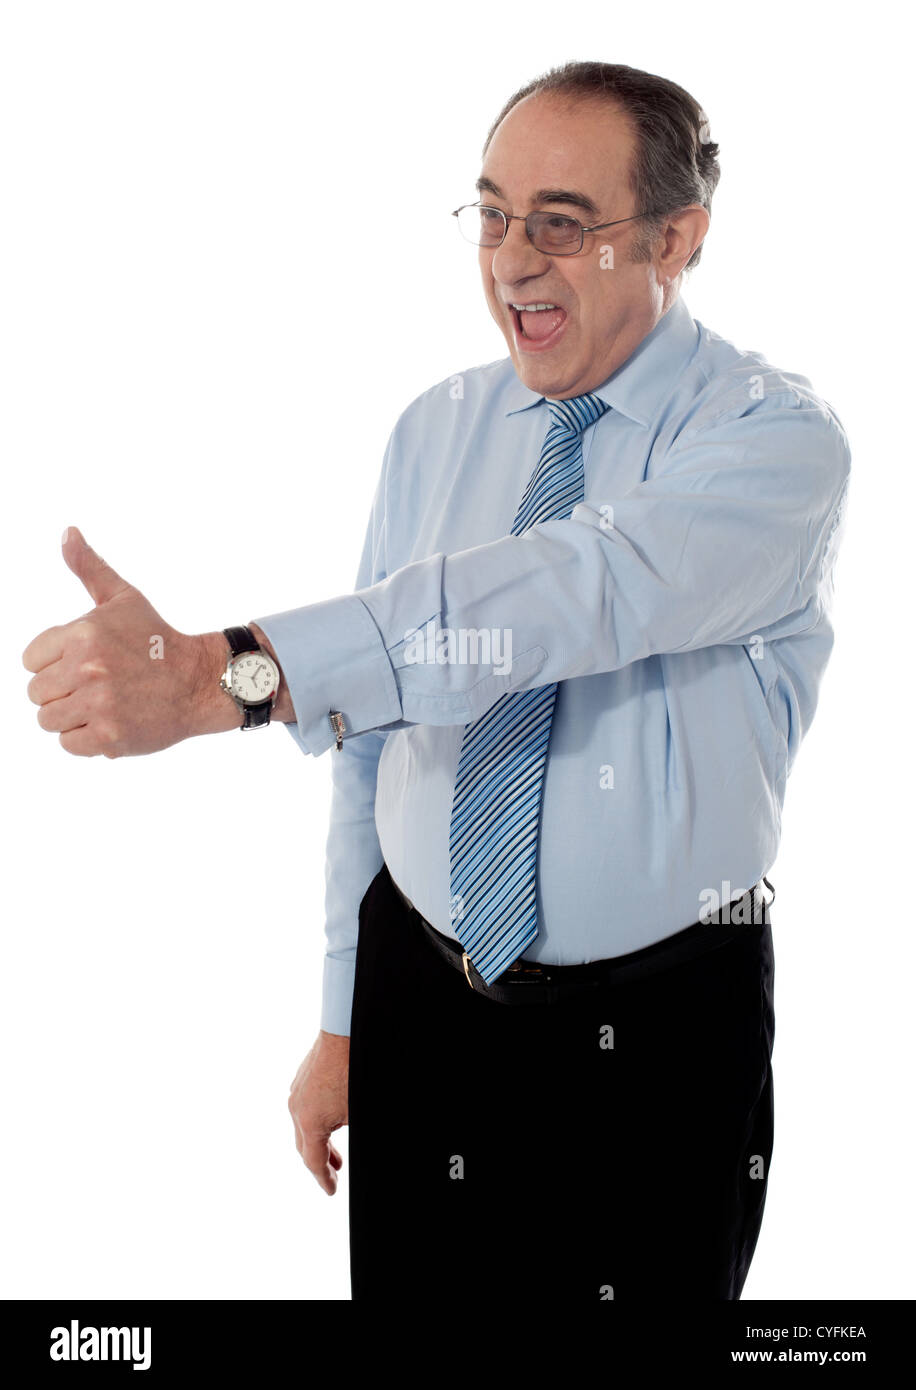 Entrepreneur showing thumbs-up isolated on white Banque D'Images